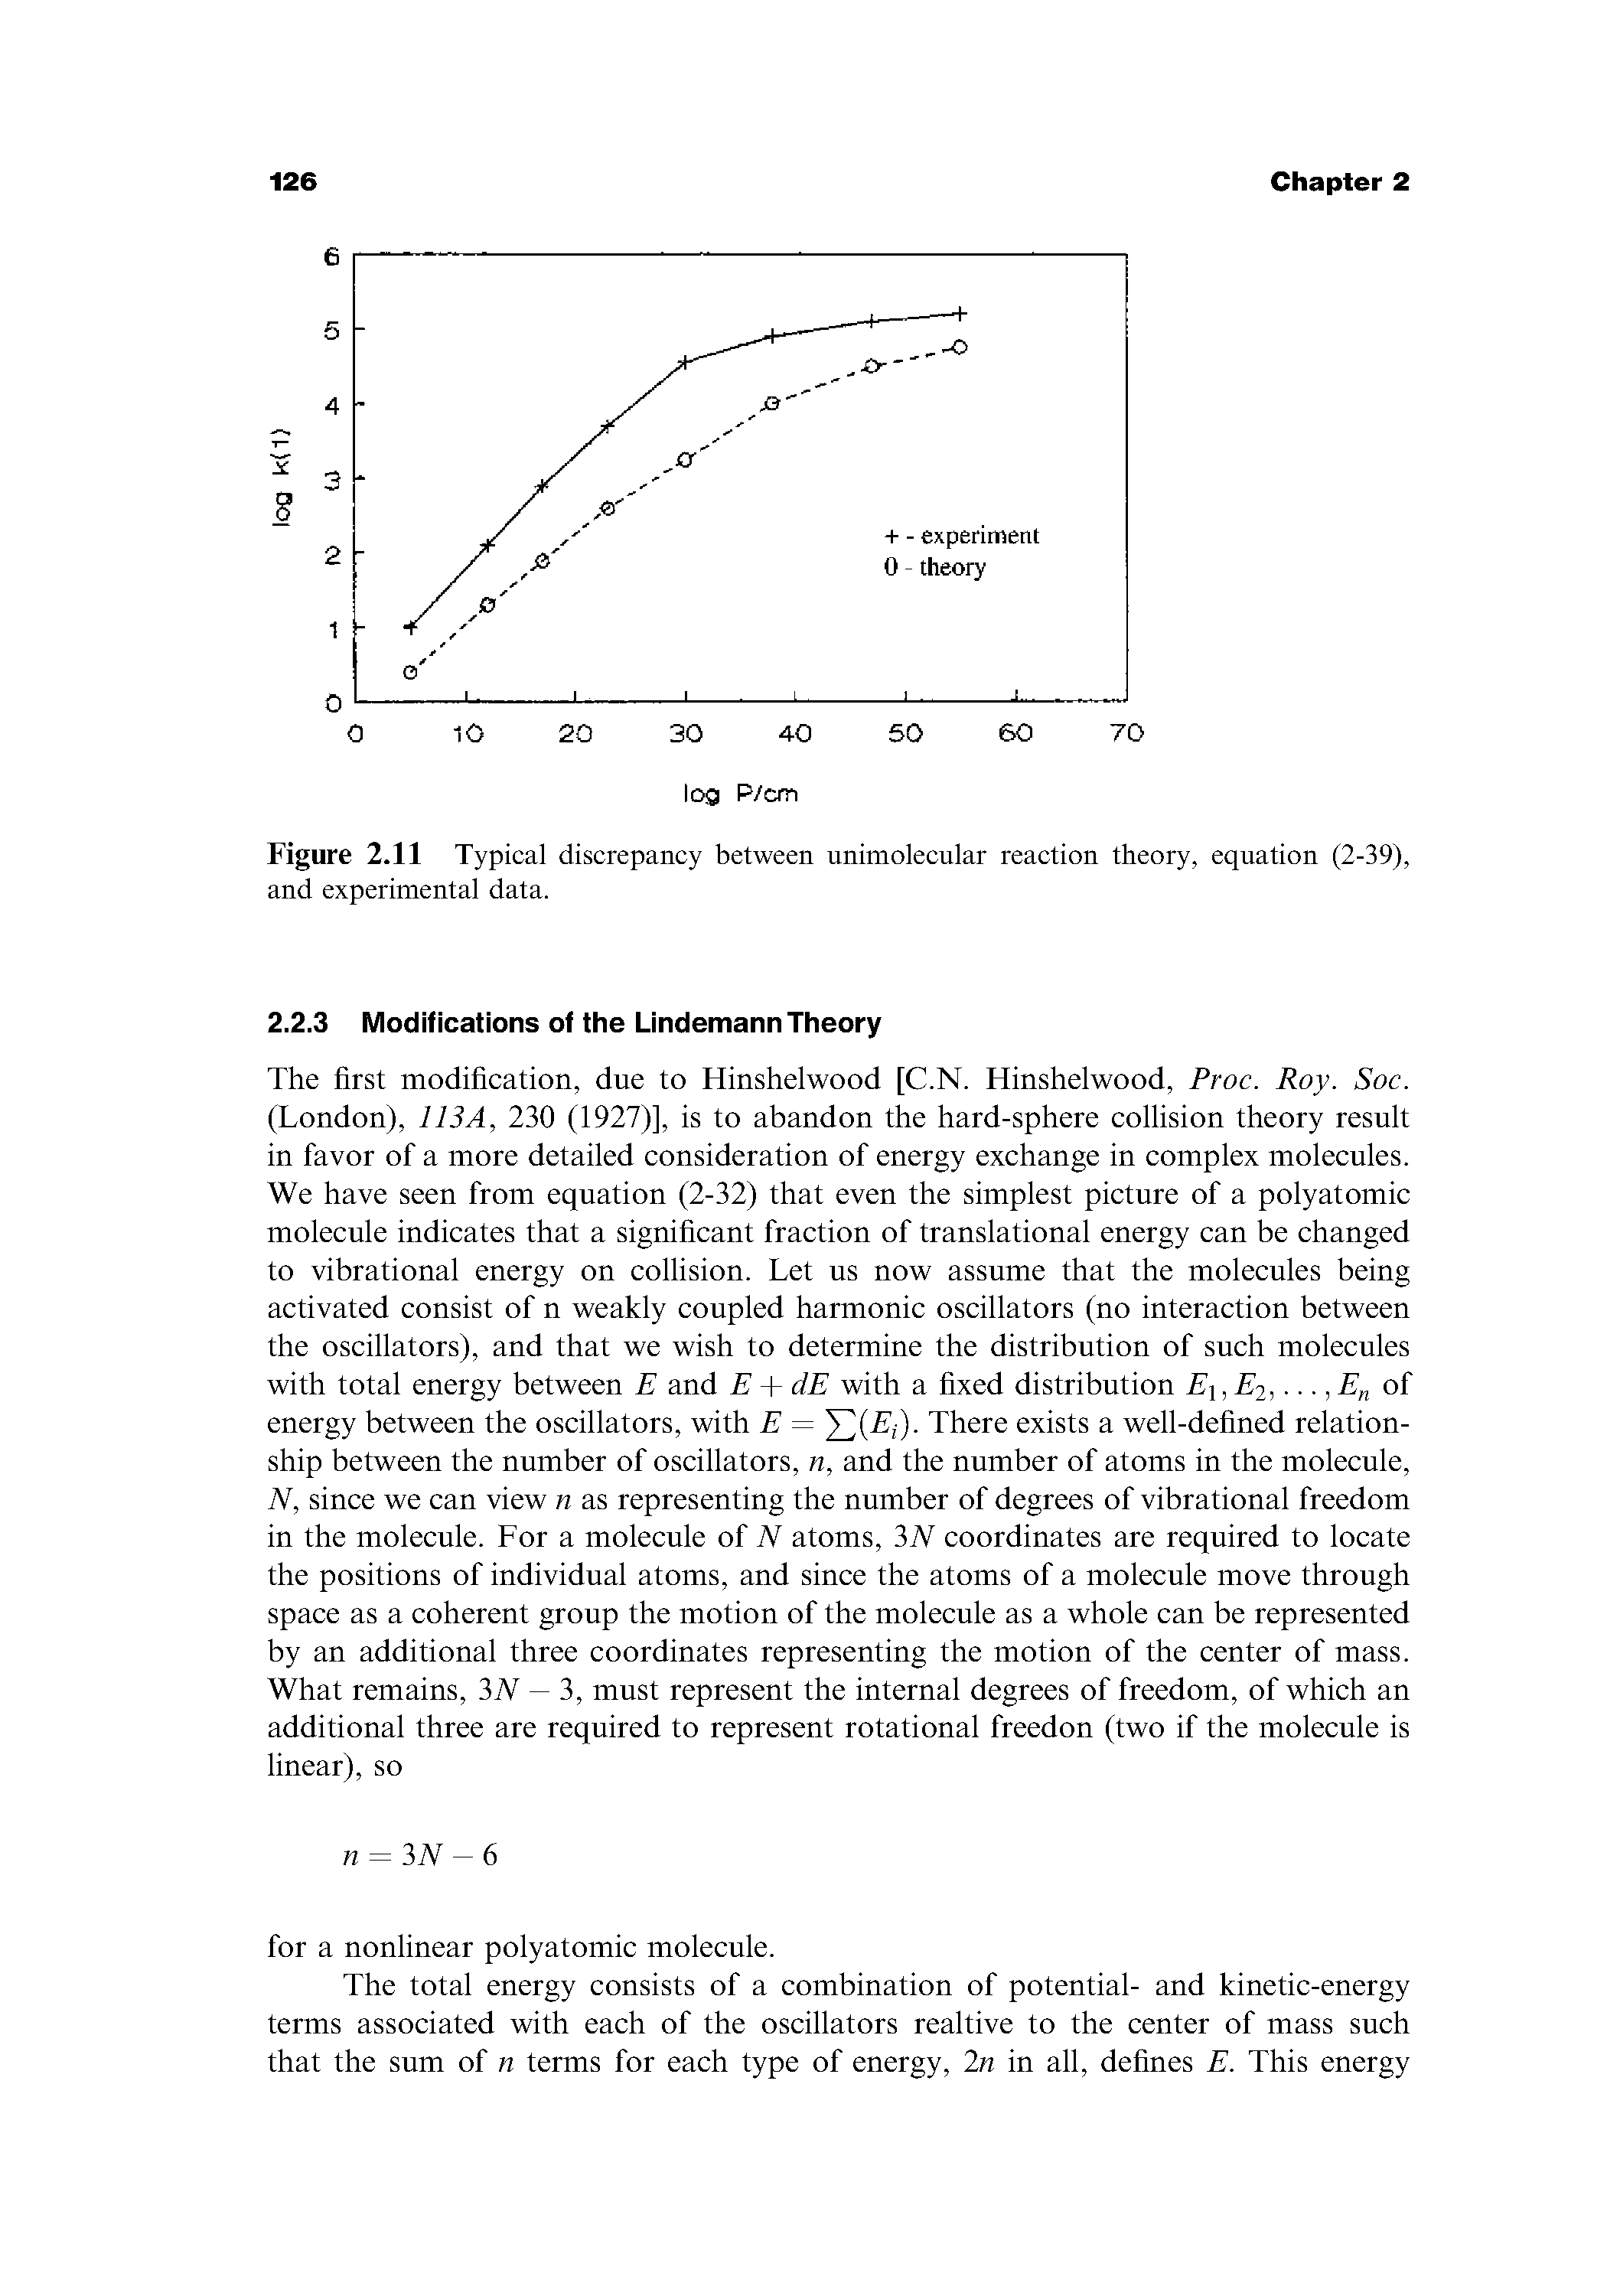 Figure 2.11 Typical discrepancy between unimolecular reaction theory, equation (2-39), and experimental data.